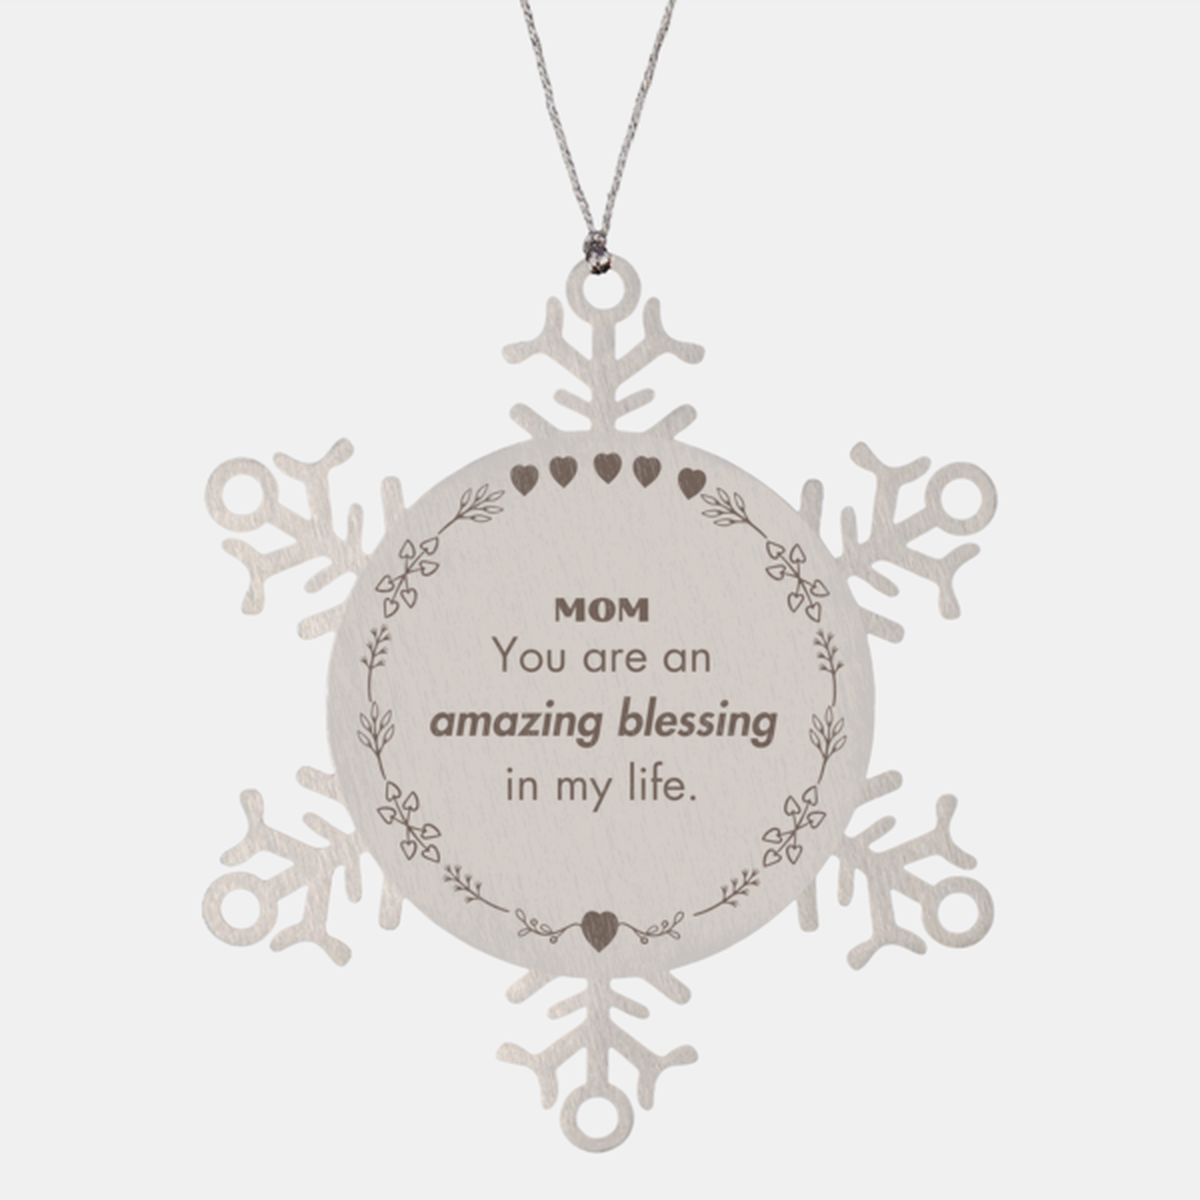 Mom Snowflake Ornament, You are an amazing blessing in my life, Thank You Gifts For Mom, Inspirational Birthday Christmas Unique Gifts For Mom